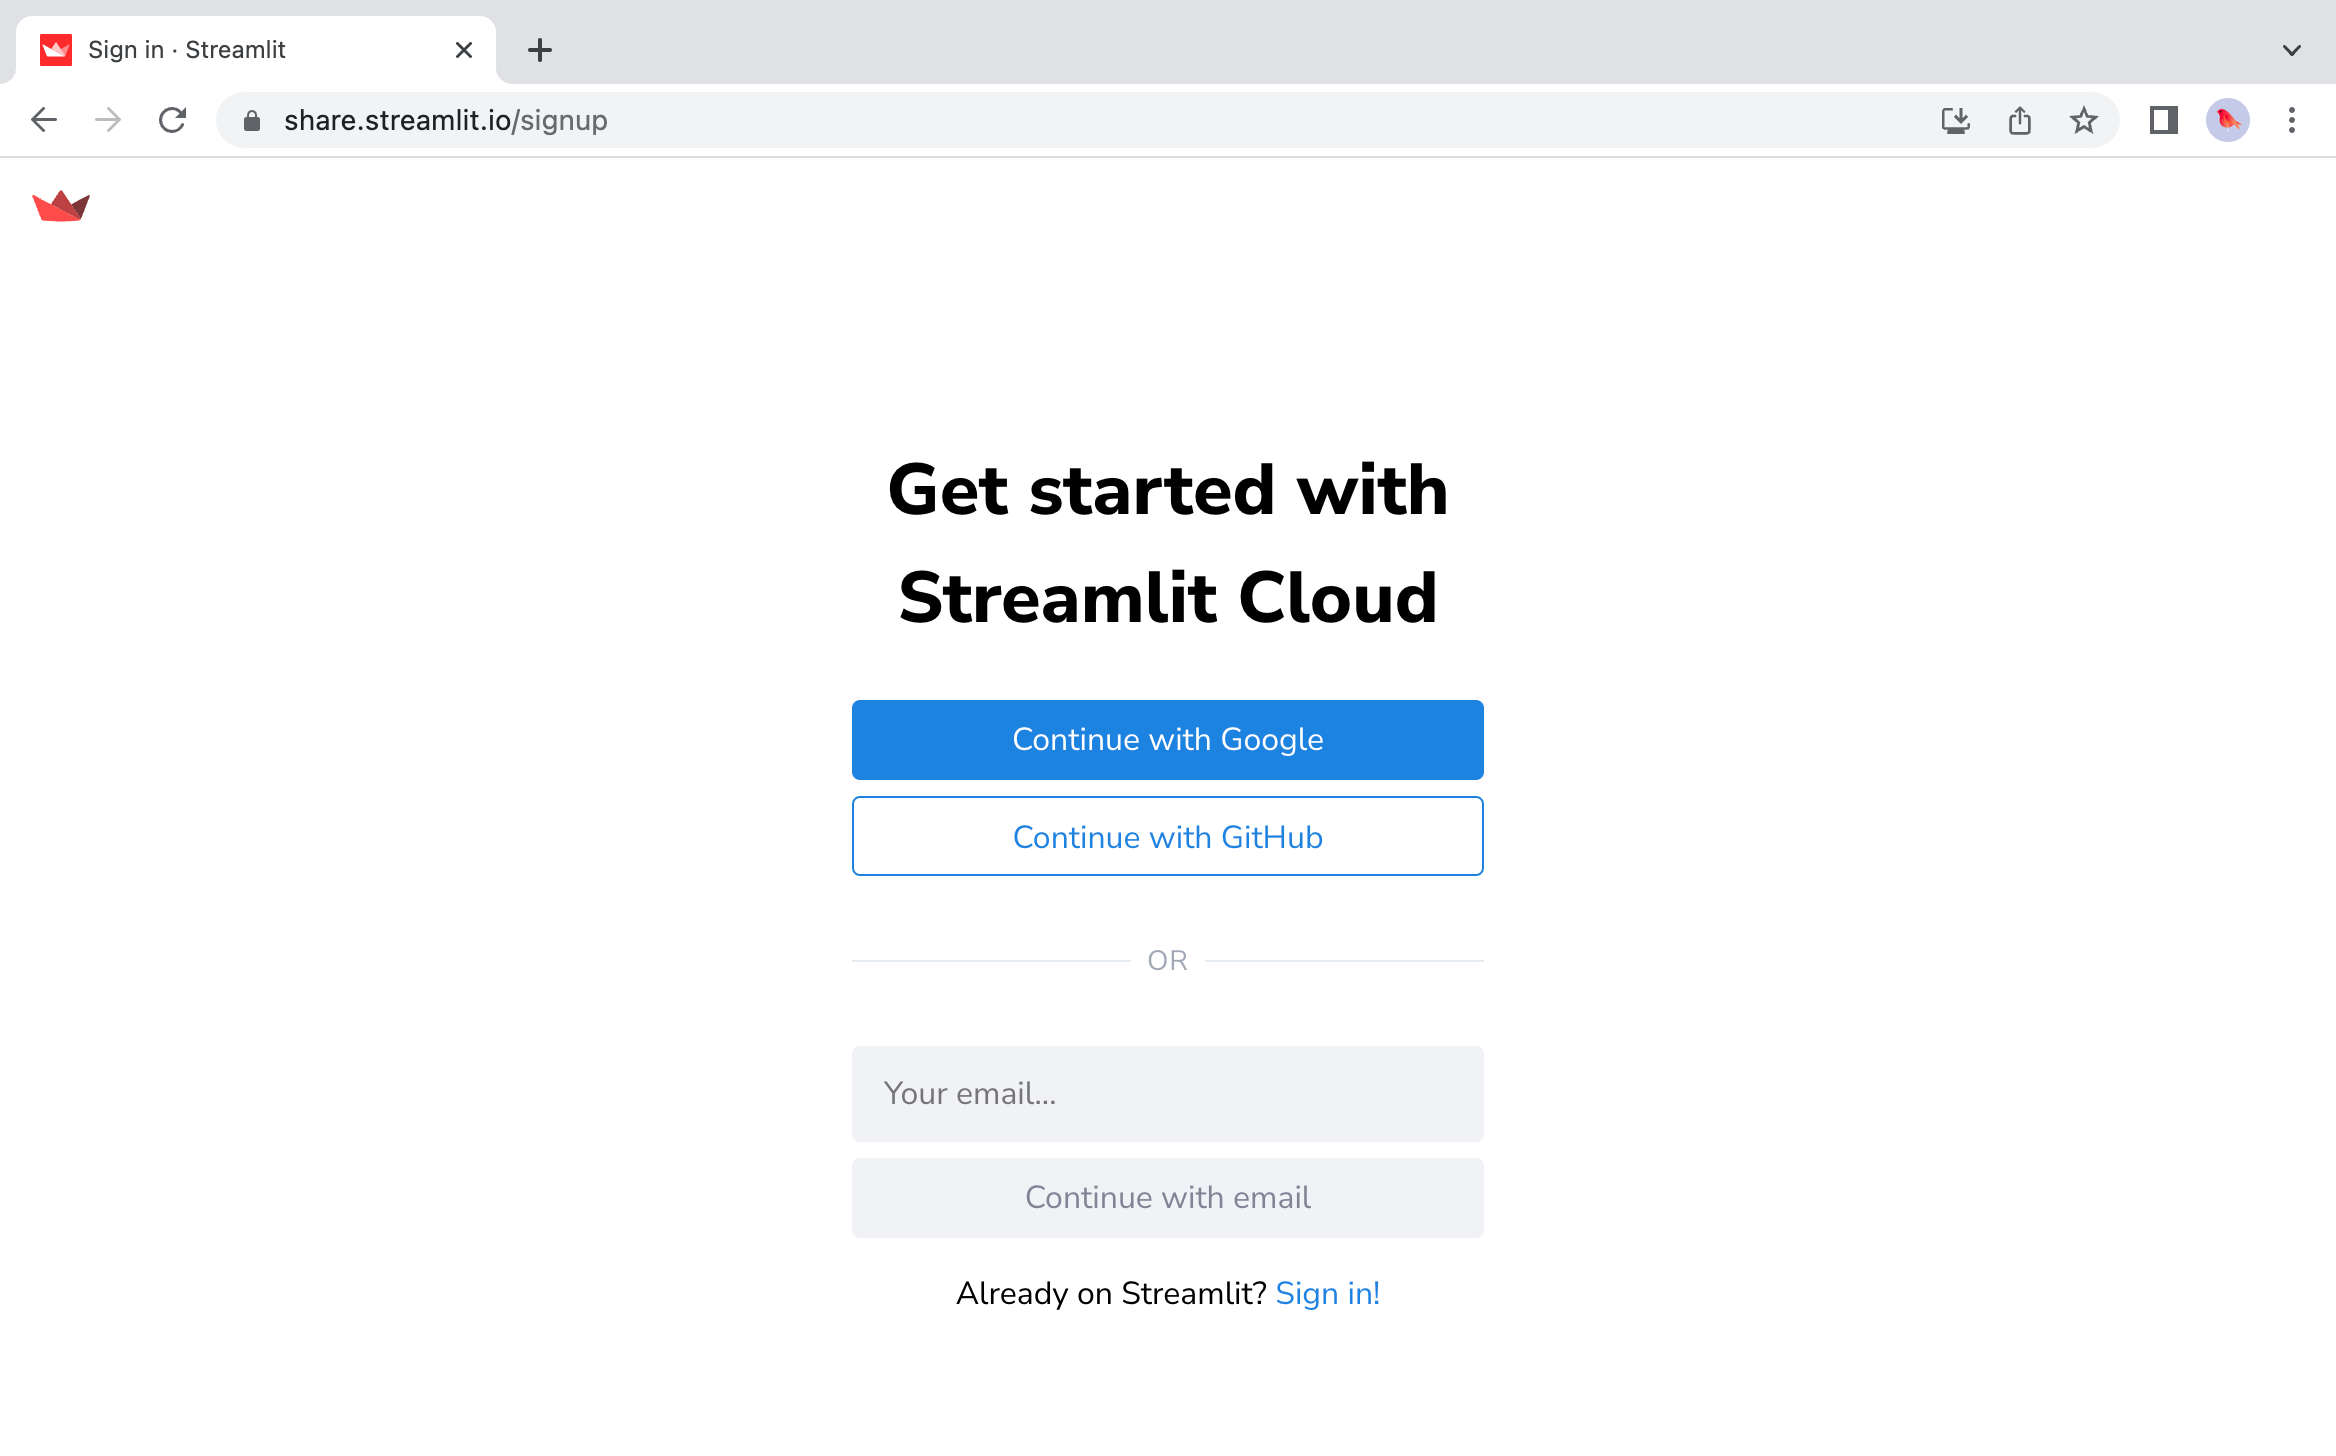 Sign up: Get started with Streamlit Community Cloud